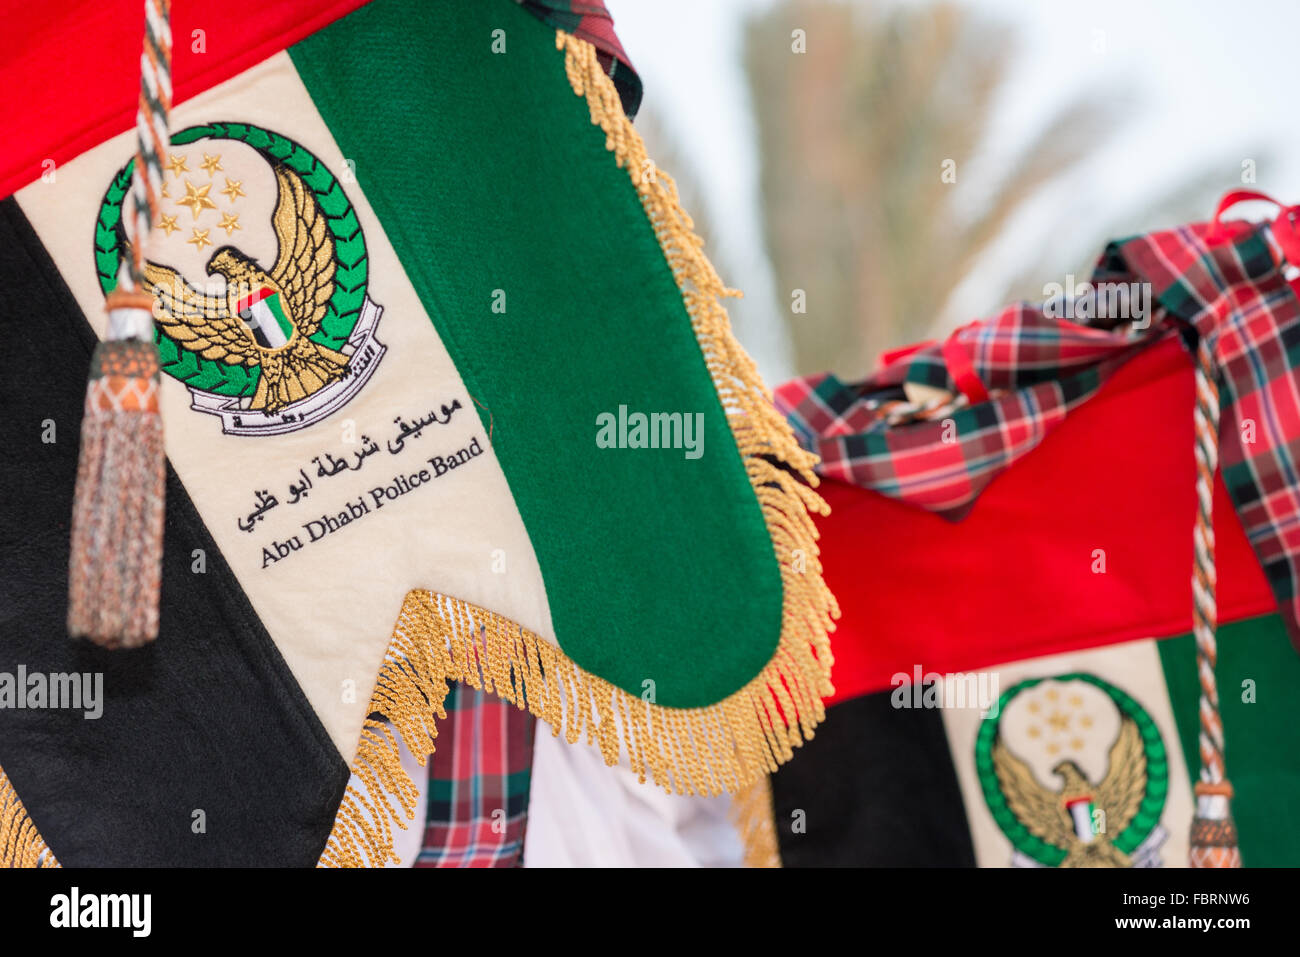 Bagpipe banner for a musician in the Abu Dhabi Police Band Stock Photo